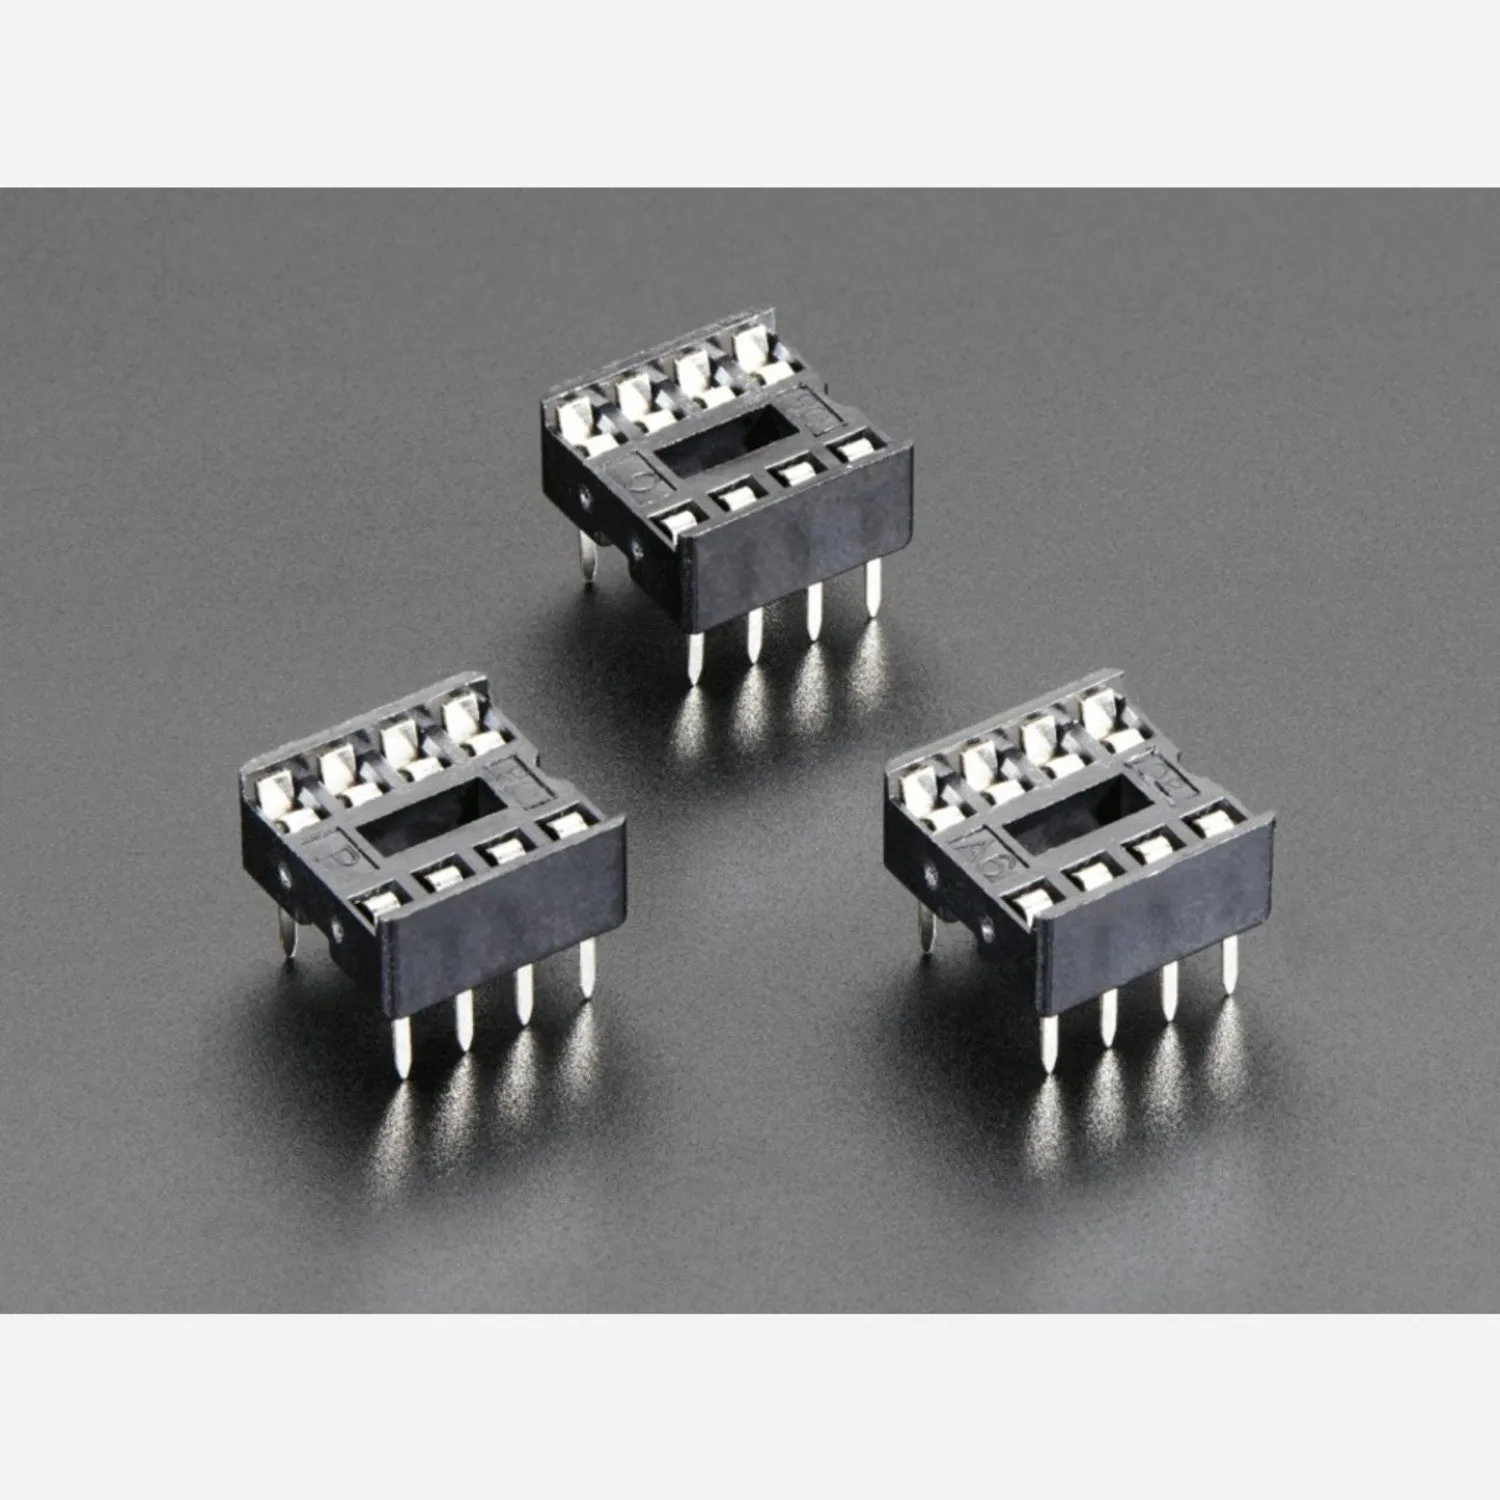 Photo of IC Sockets - Packs of 3 - Various Sizes